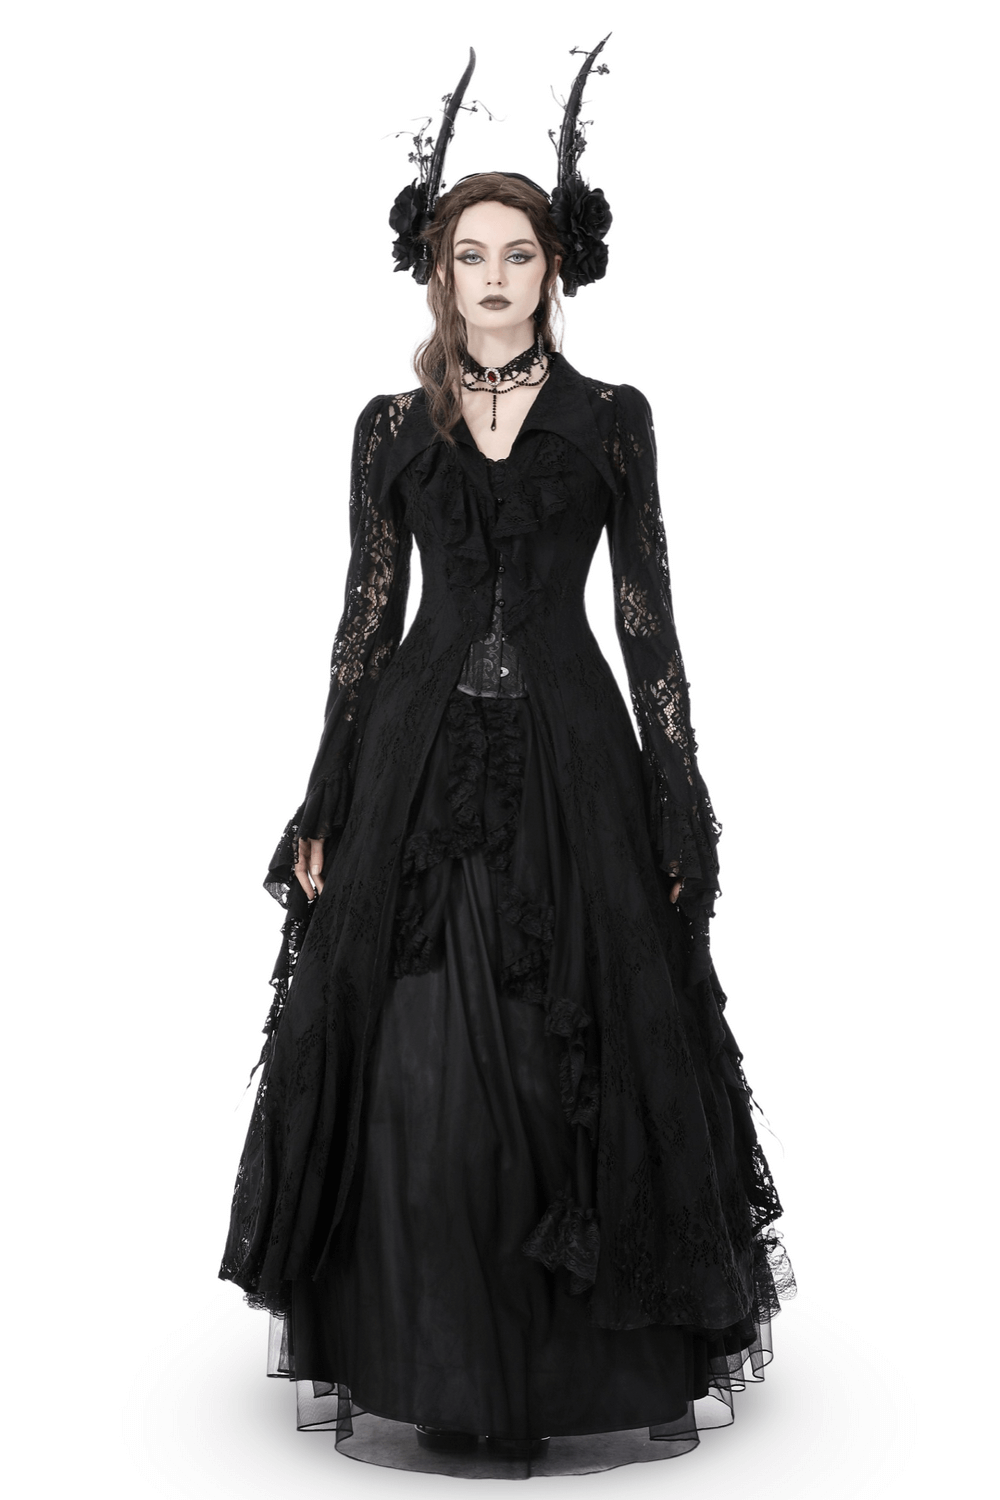 Black Lace Cape with Daring Cutouts - Gothic Romance